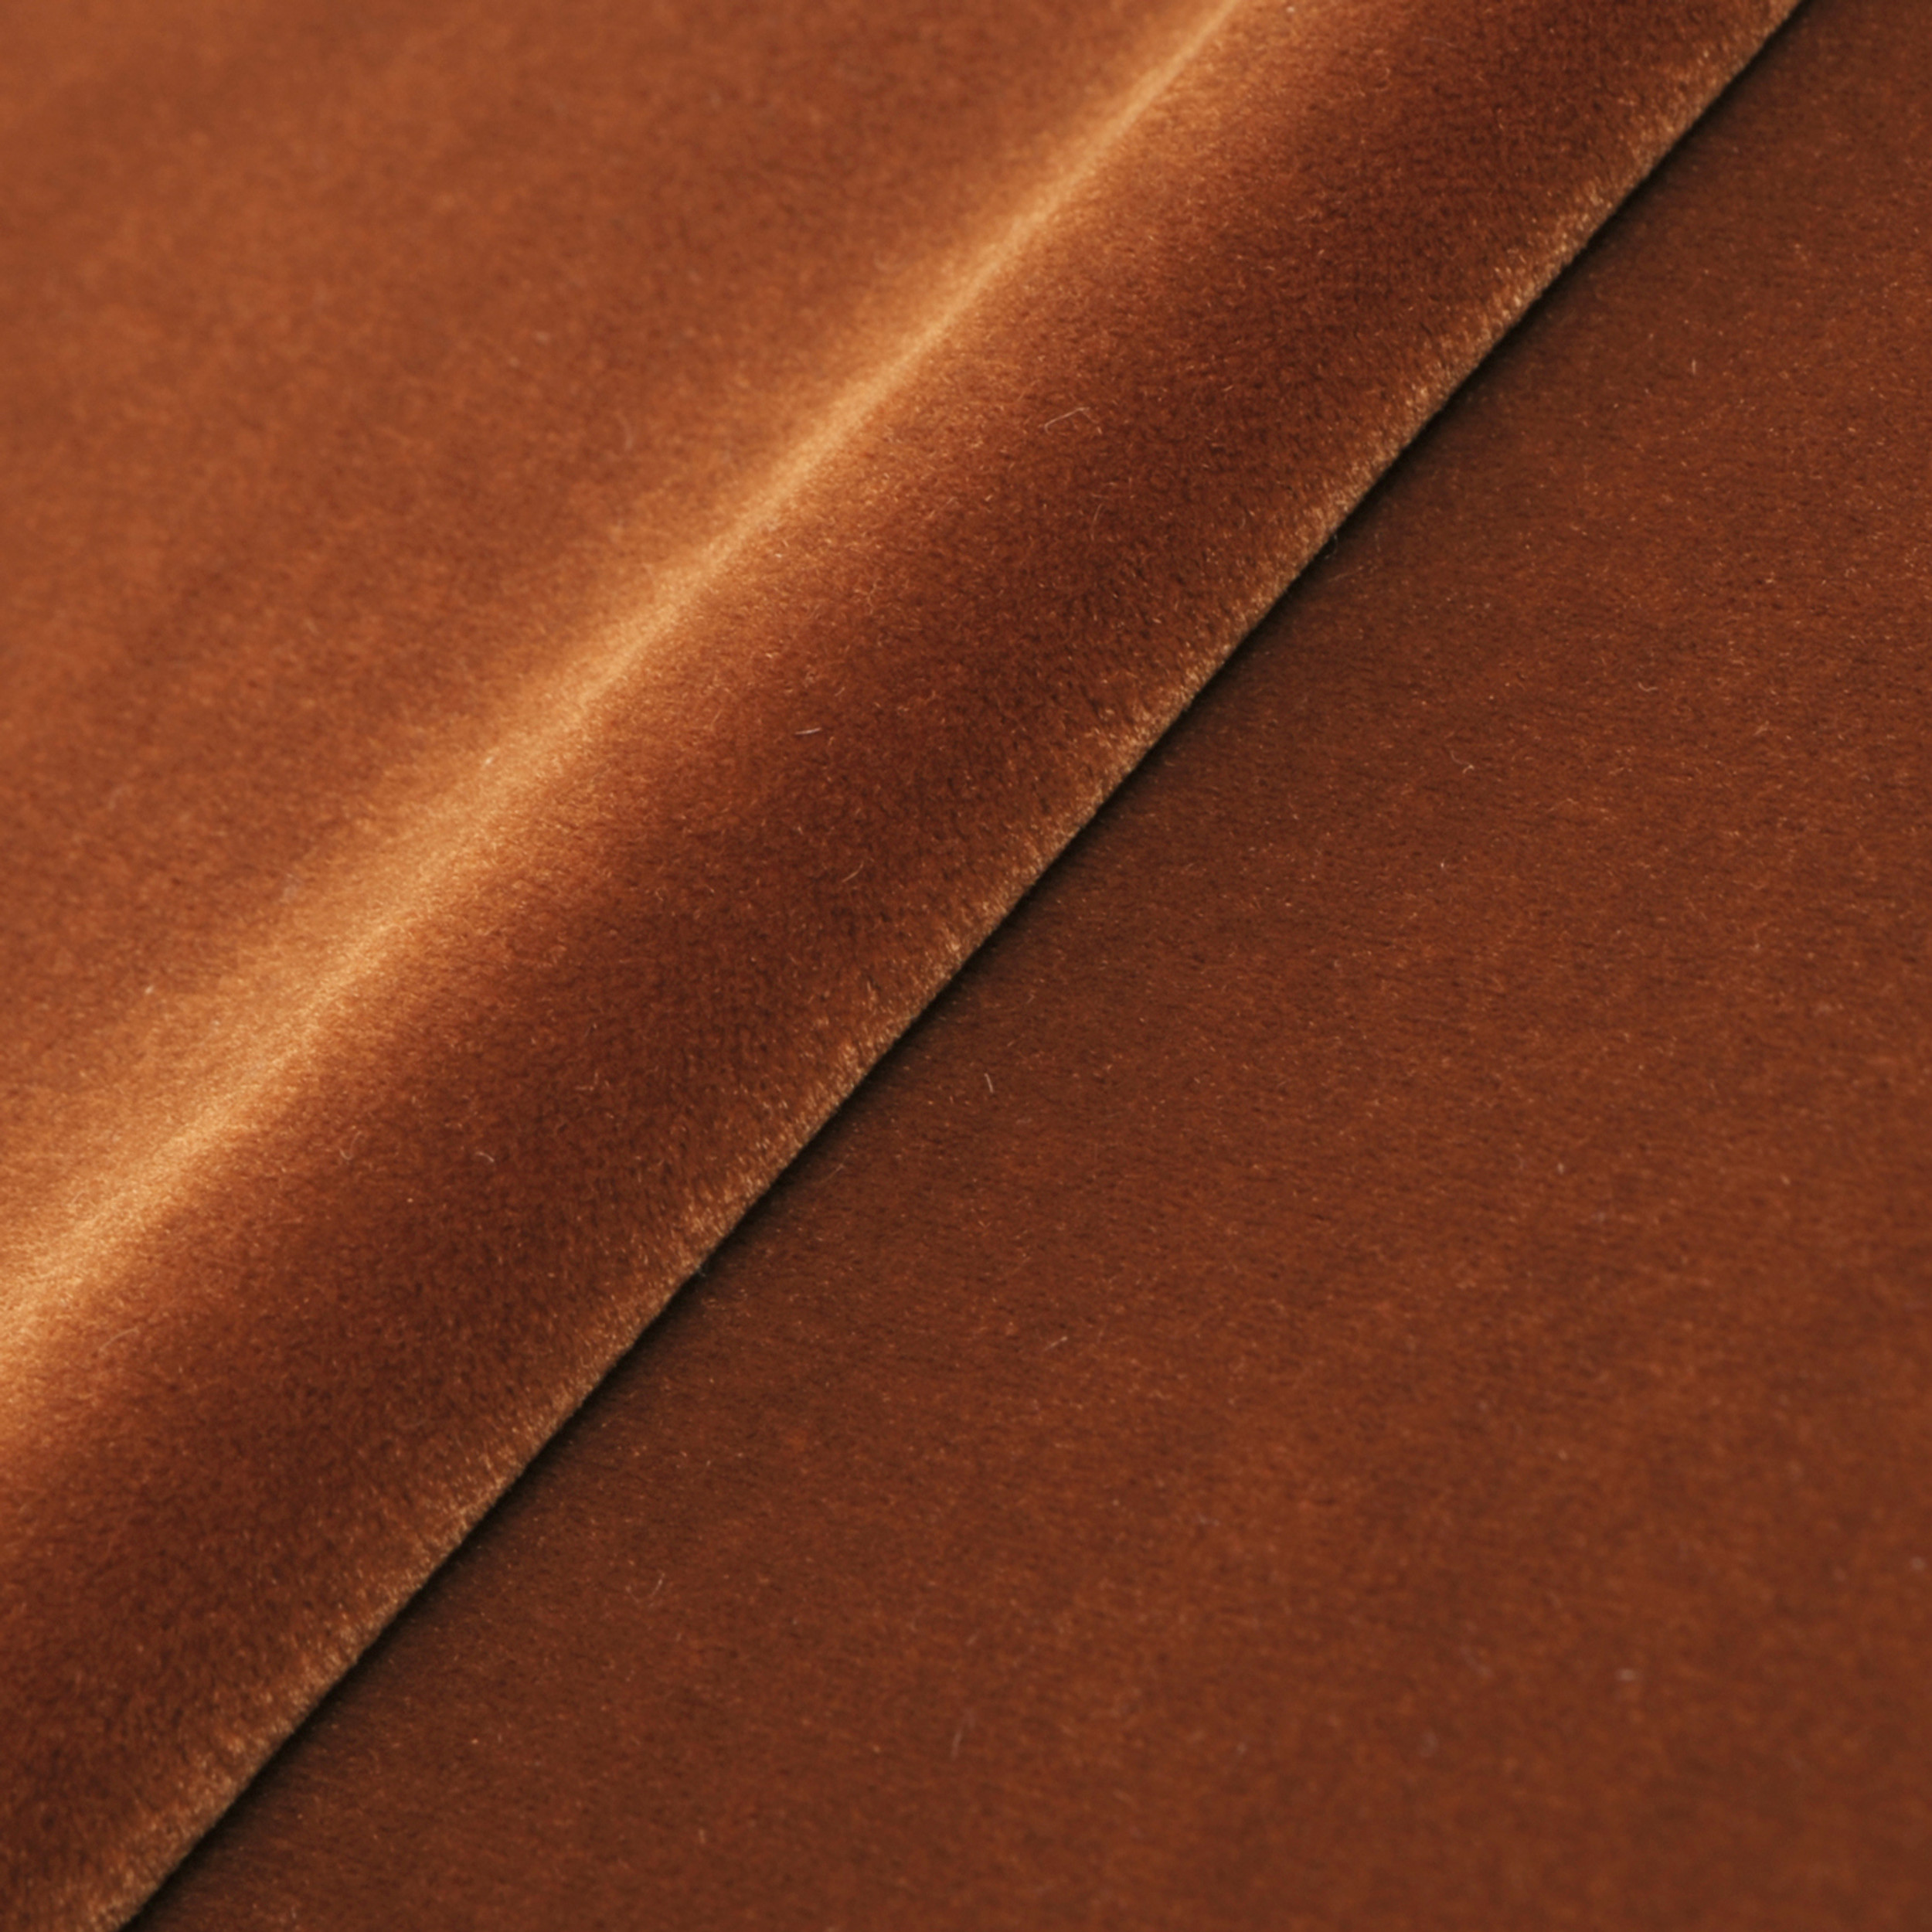 Jennifer Taylor 2x2 in. Tan Brown Faux Leather Fabric Swatch Sample